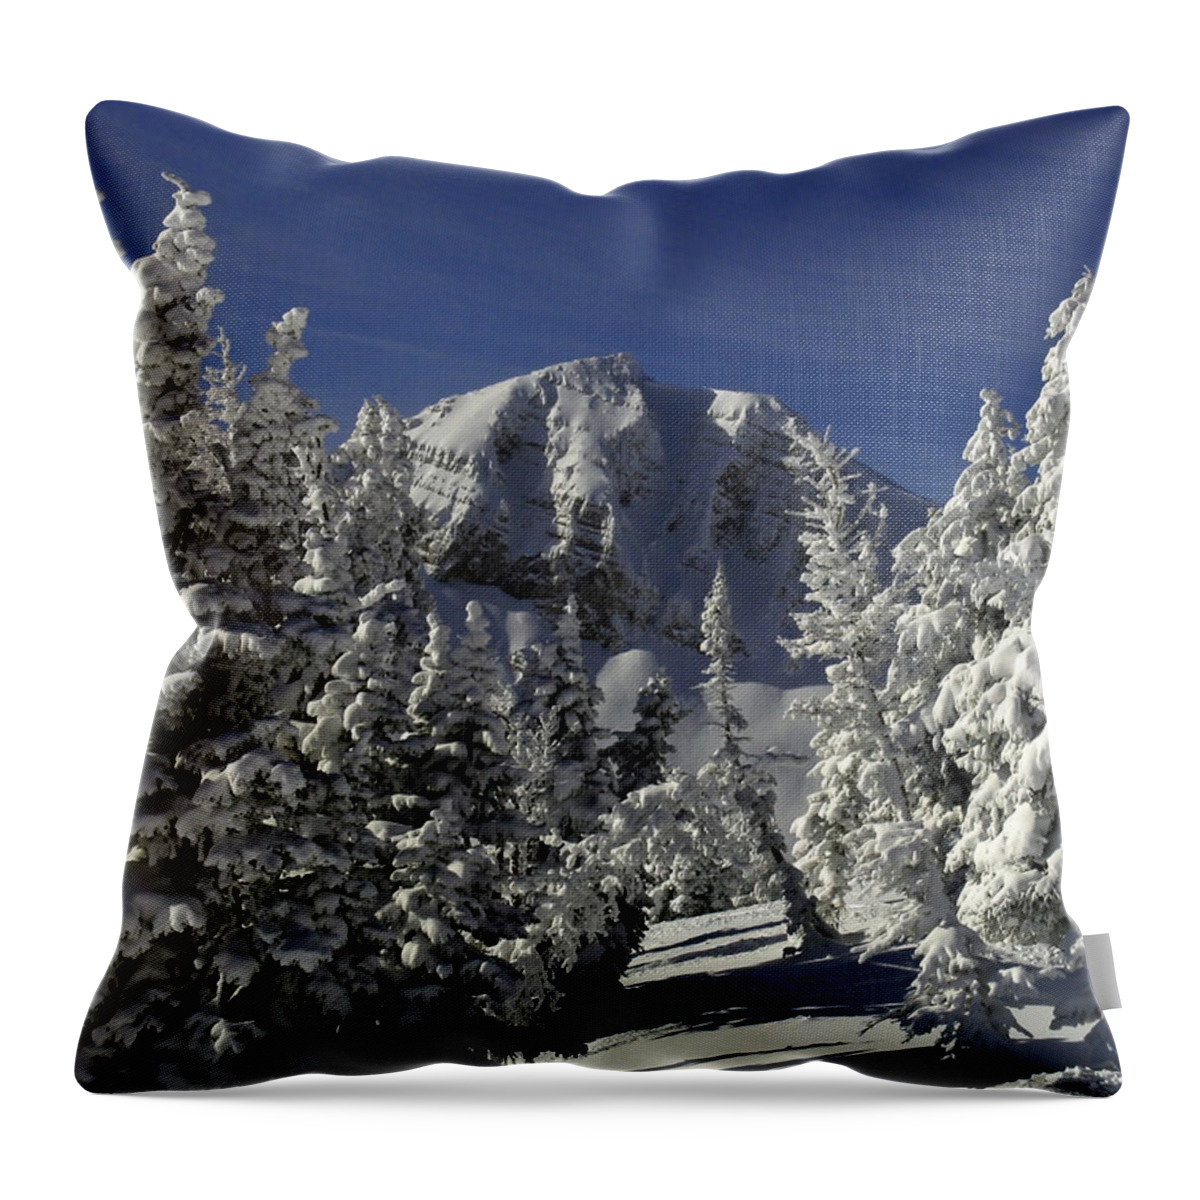 Cody Peak Throw Pillow featuring the photograph Cody Peak After a Snow by Raymond Salani III